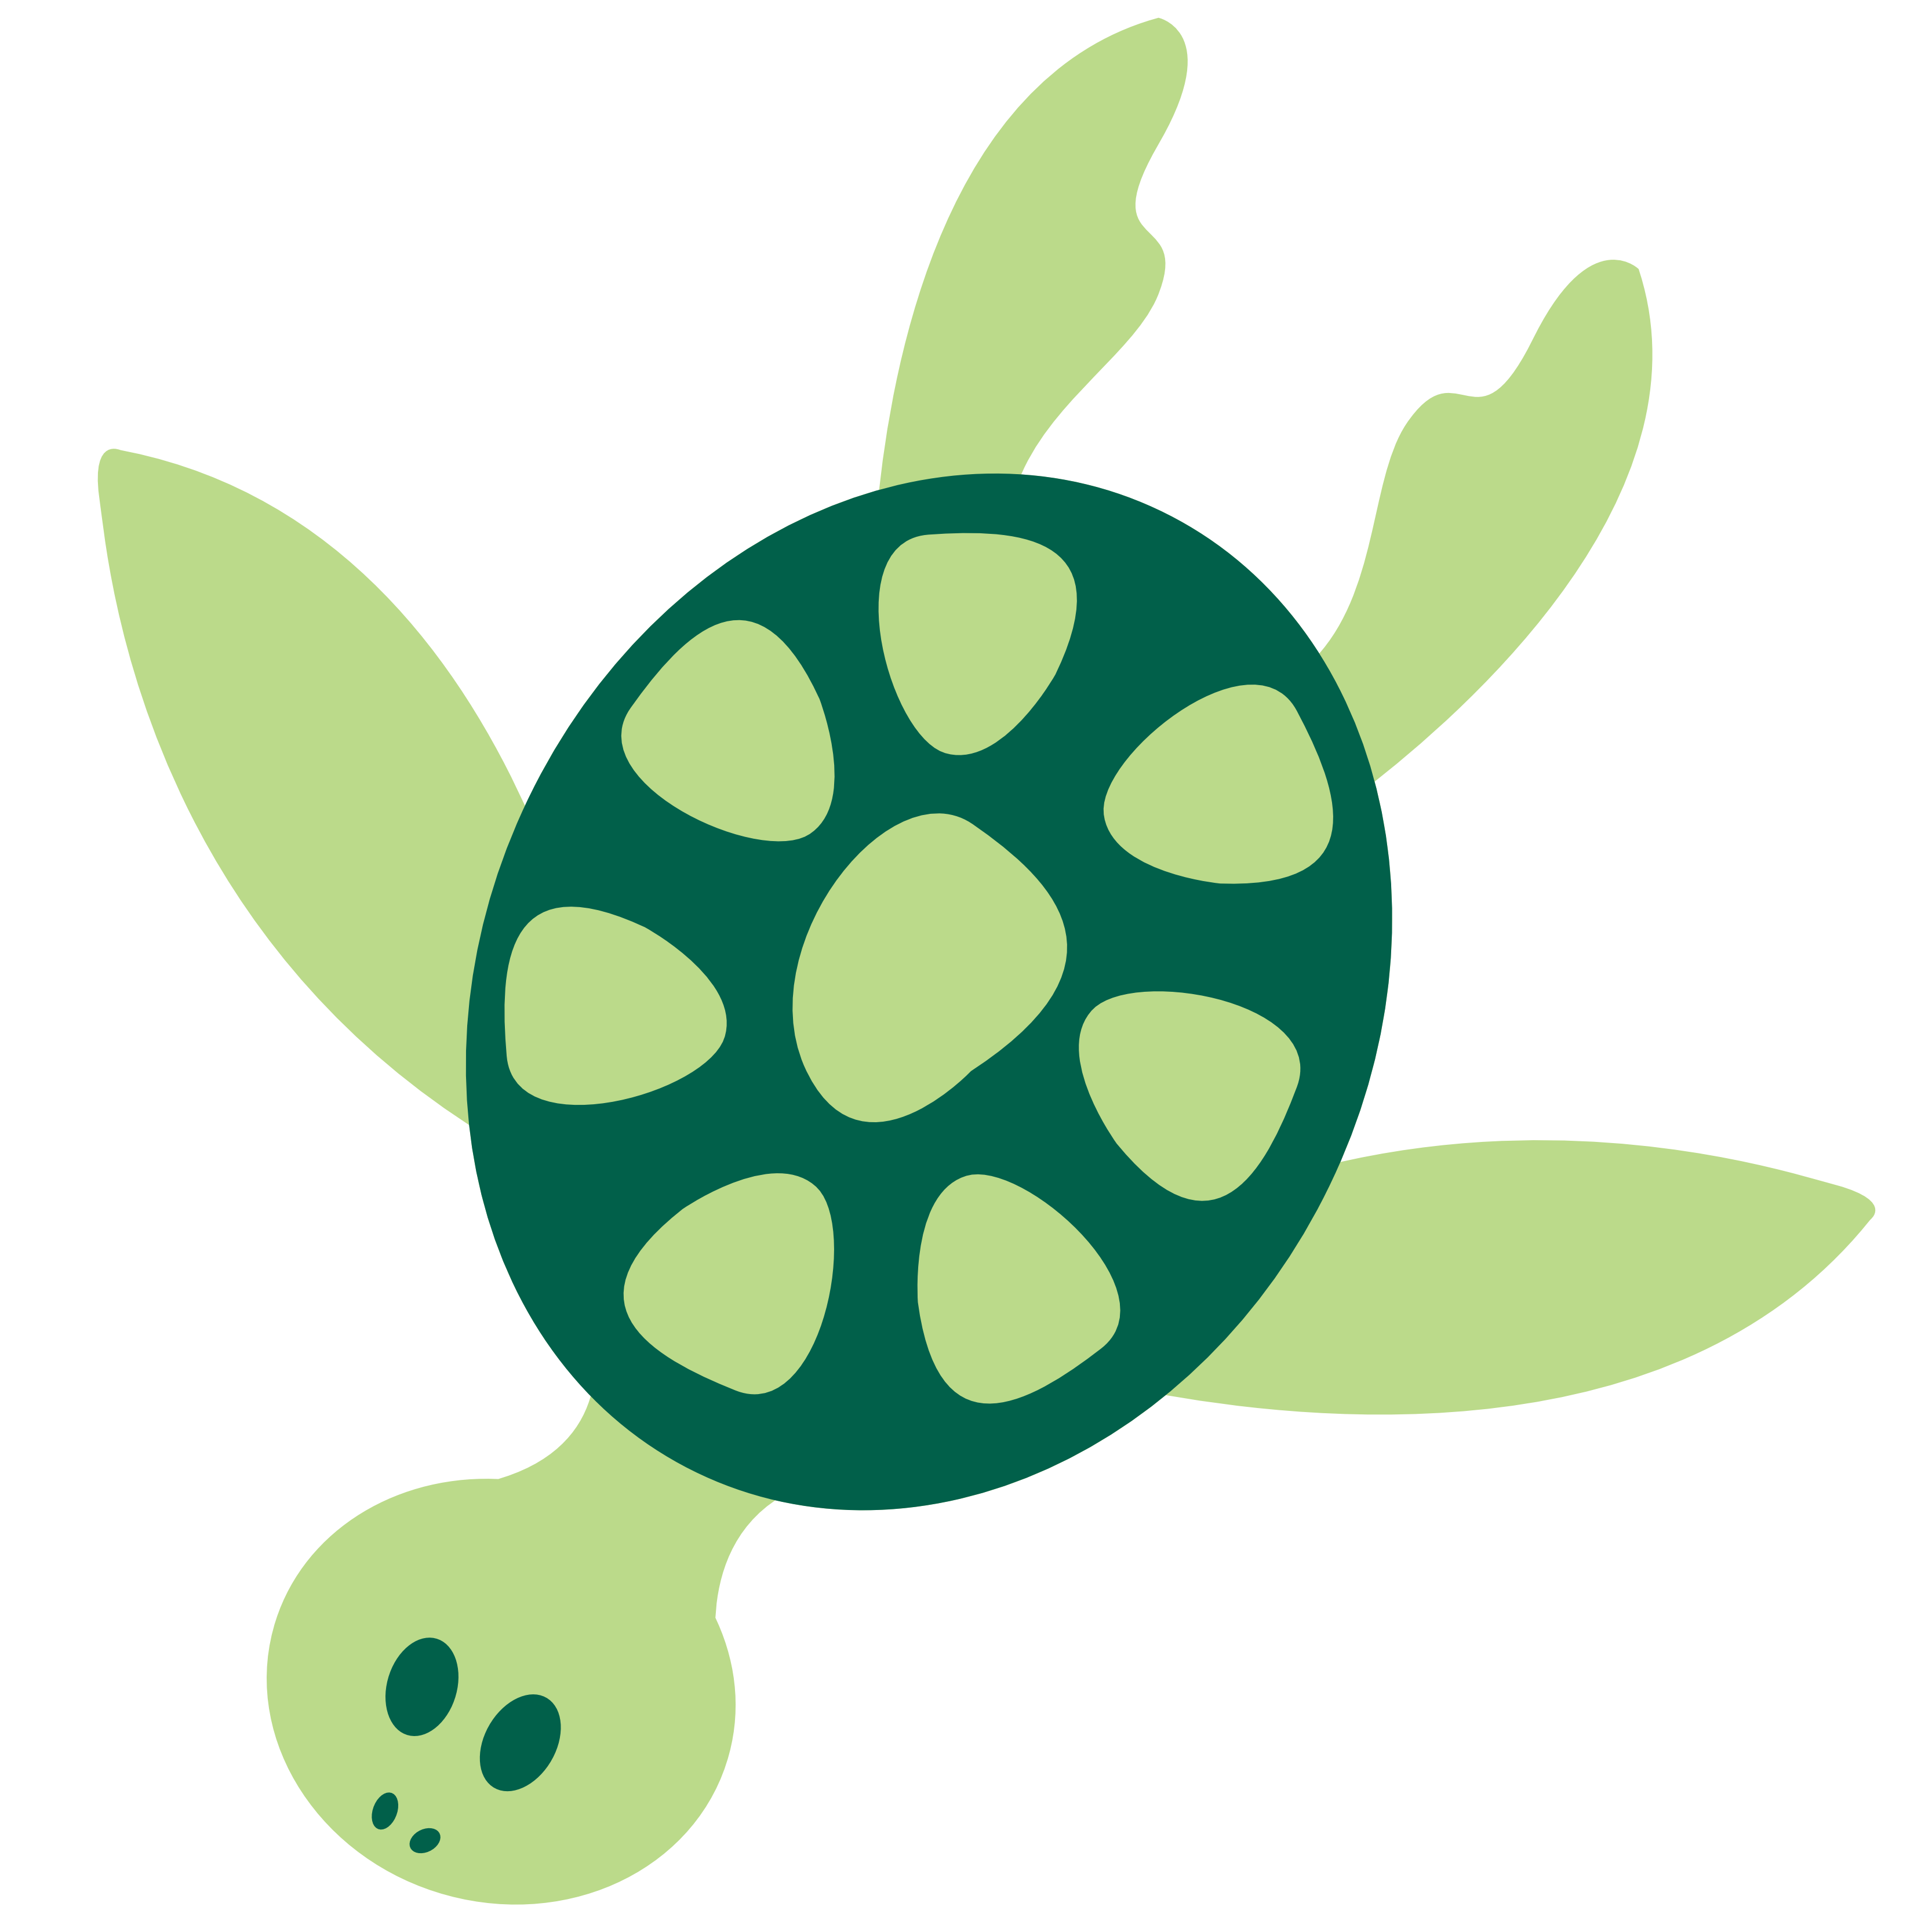 Sea Turtle Silhouette | Clipart Panda - Free Clipart Images